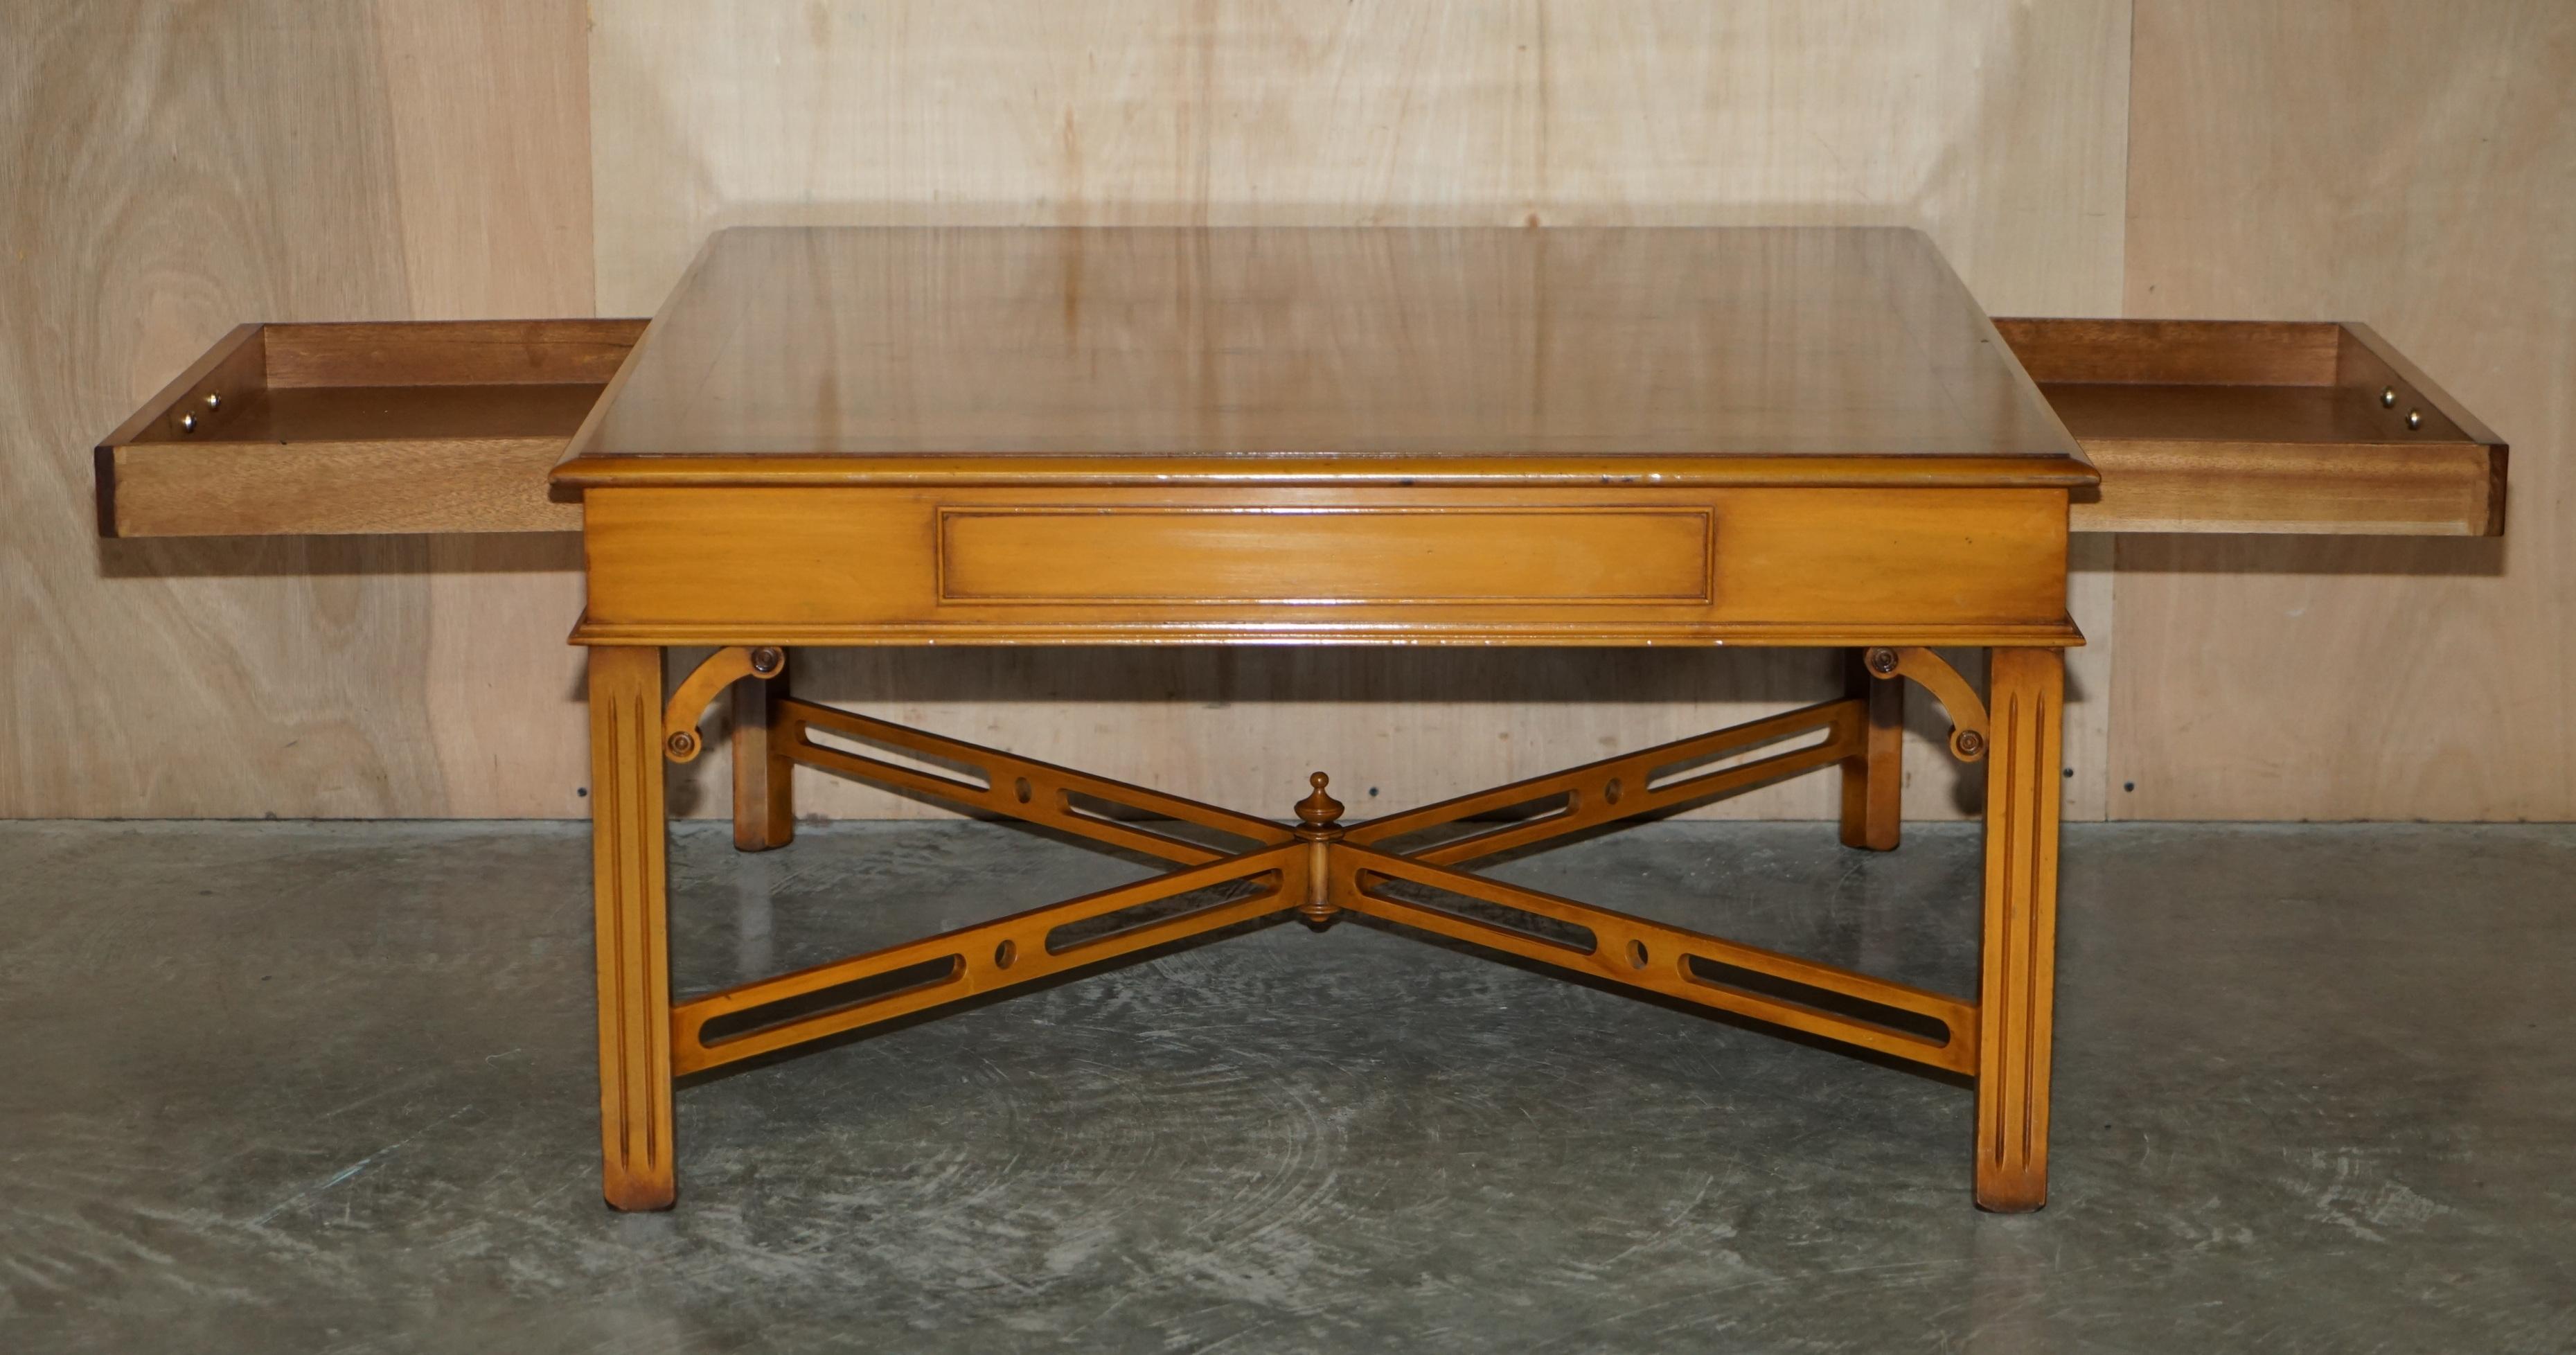 Lovely Burr Yew Wood Two Drawer Coffee Table with Thomas Chippendale Stretches For Sale 9